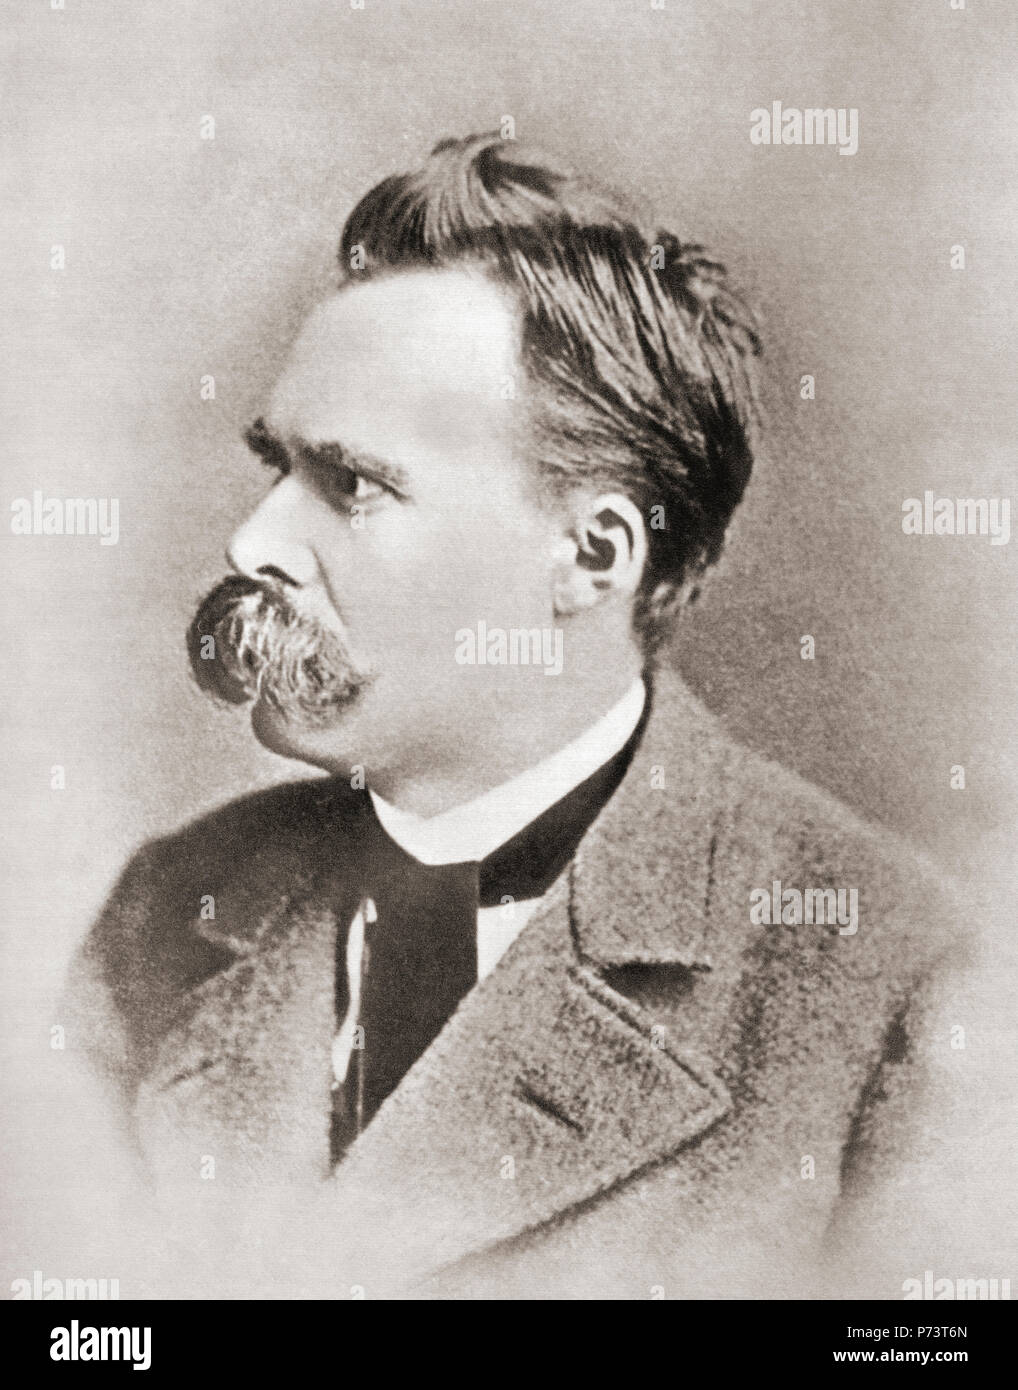 Friedrich Wilhelm Nietzsche, 1844 – 1900.  German philosopher, cultural critic, composer, poet, philologist and a Latin and Greek scholar.  After a contemporary print. Stock Photo